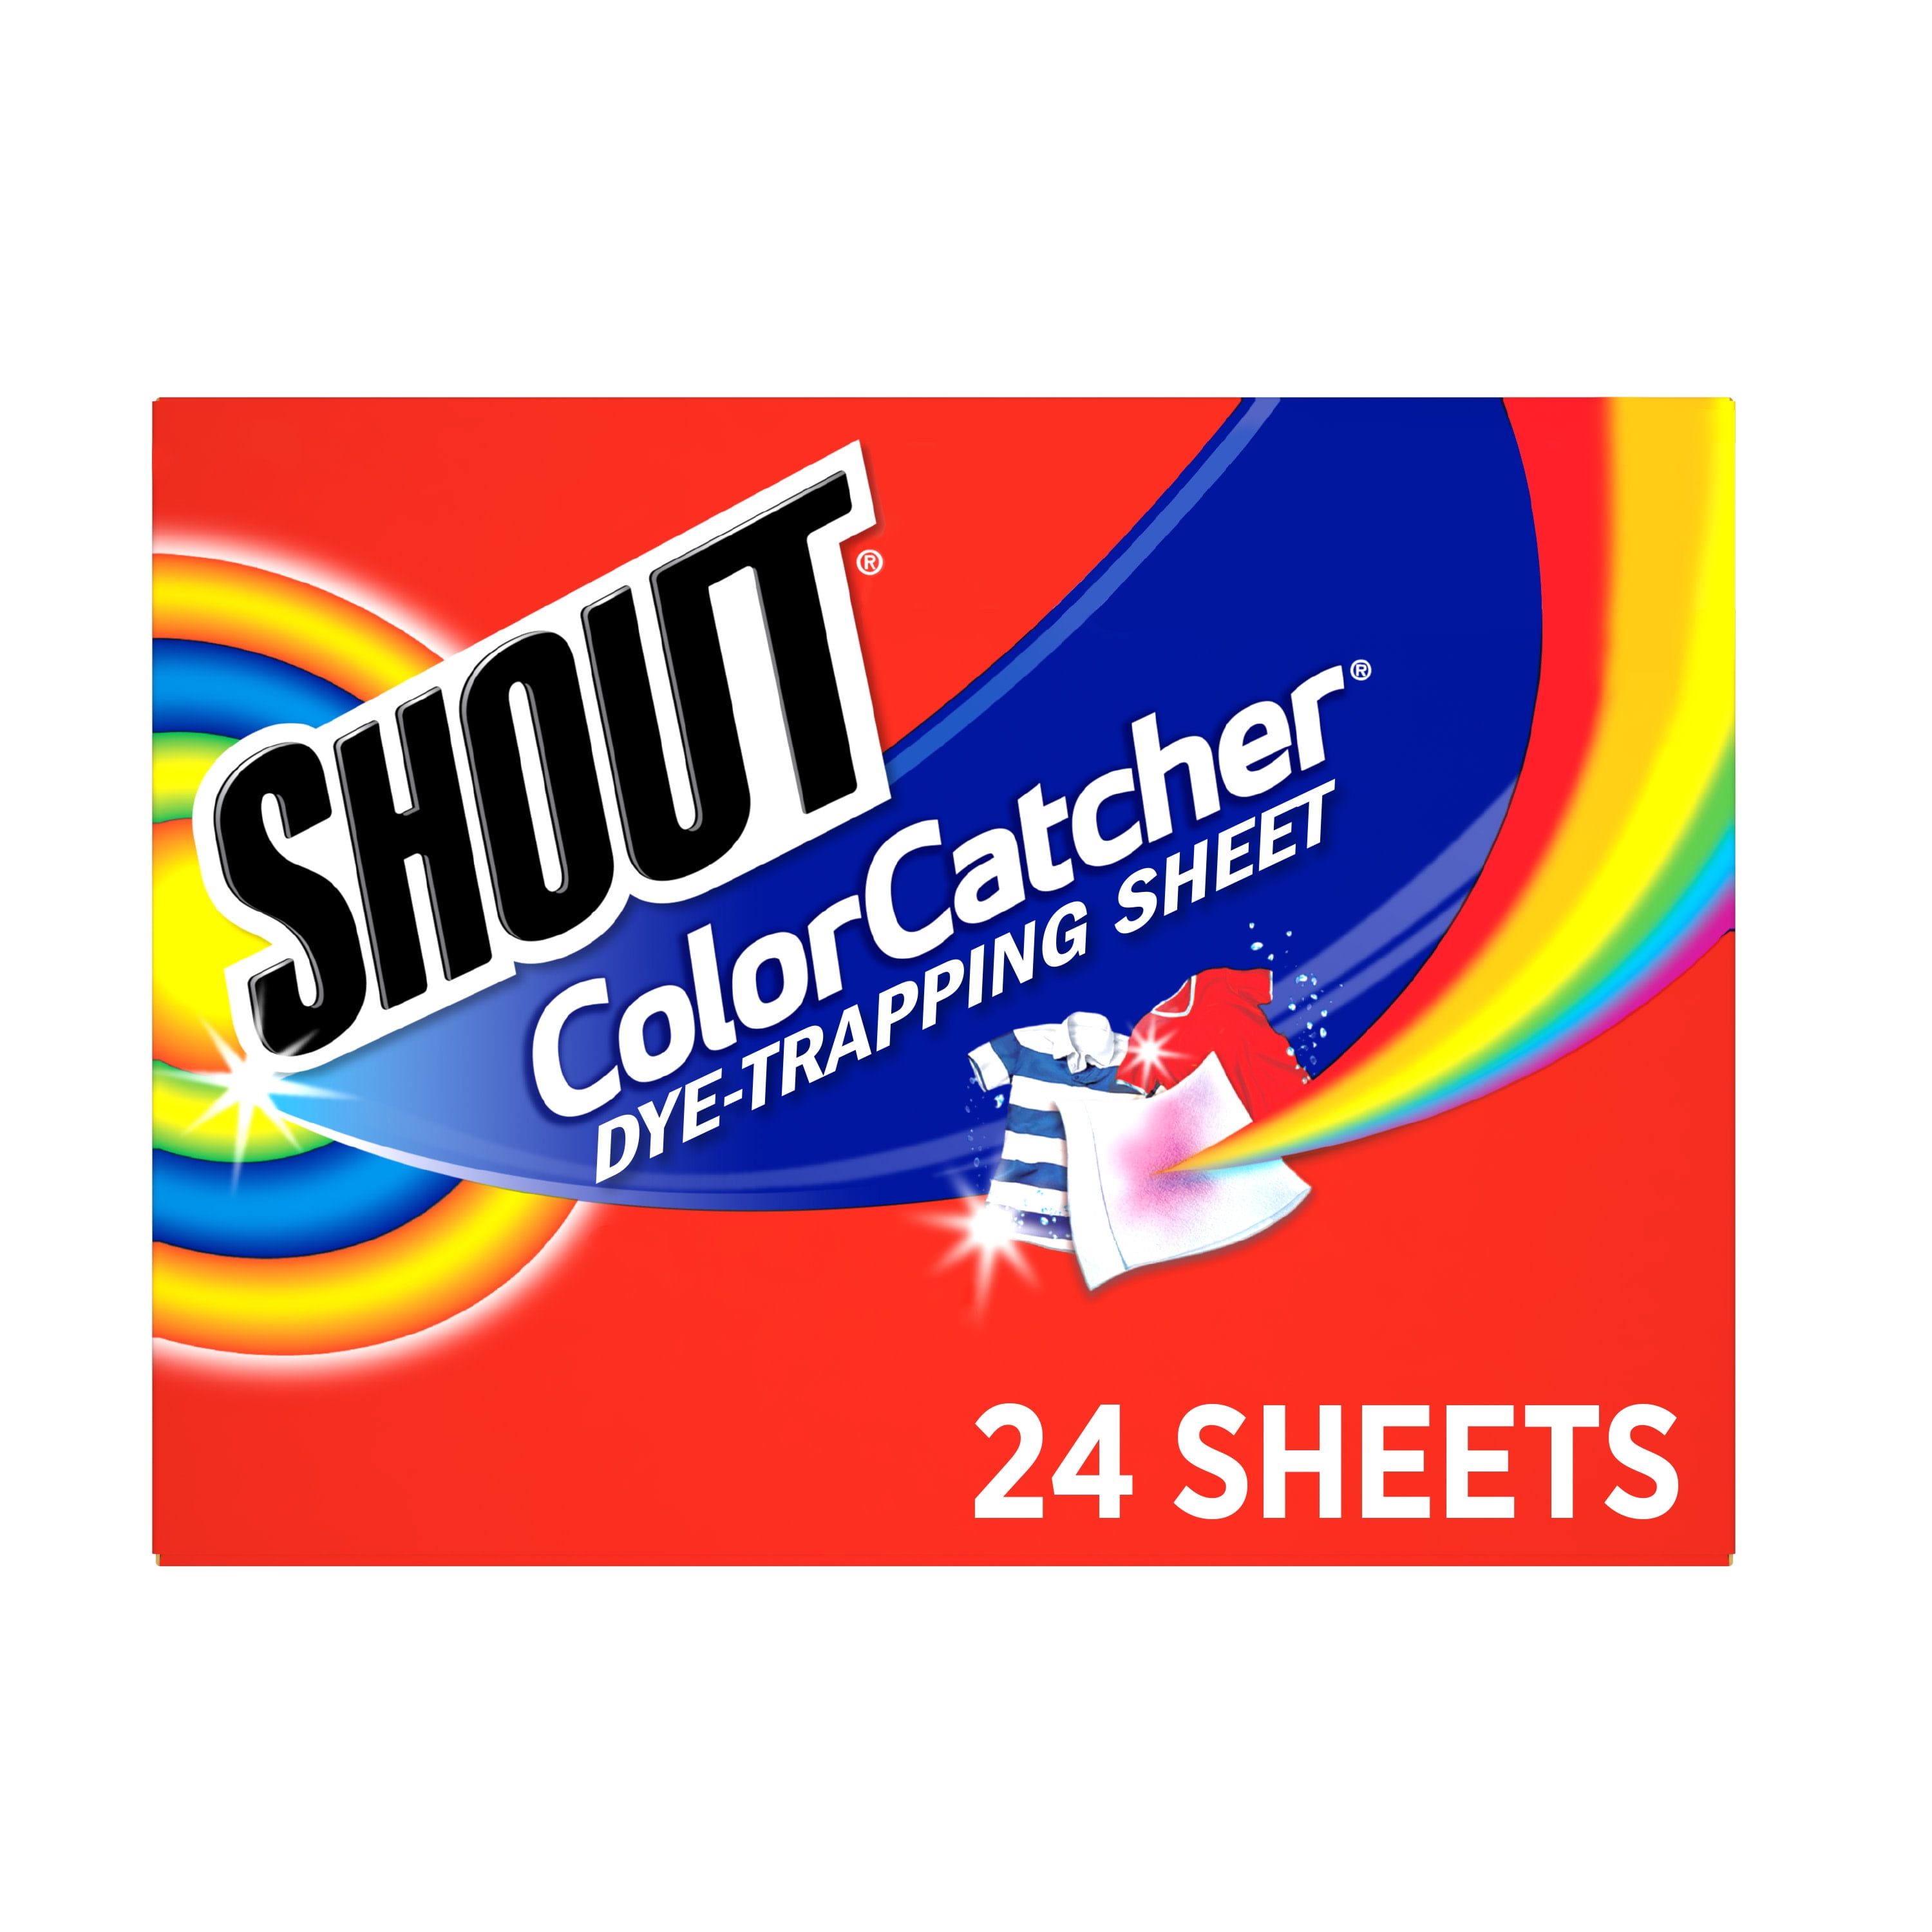 Shout Color Catcher Sheets – Almost Every Thursday